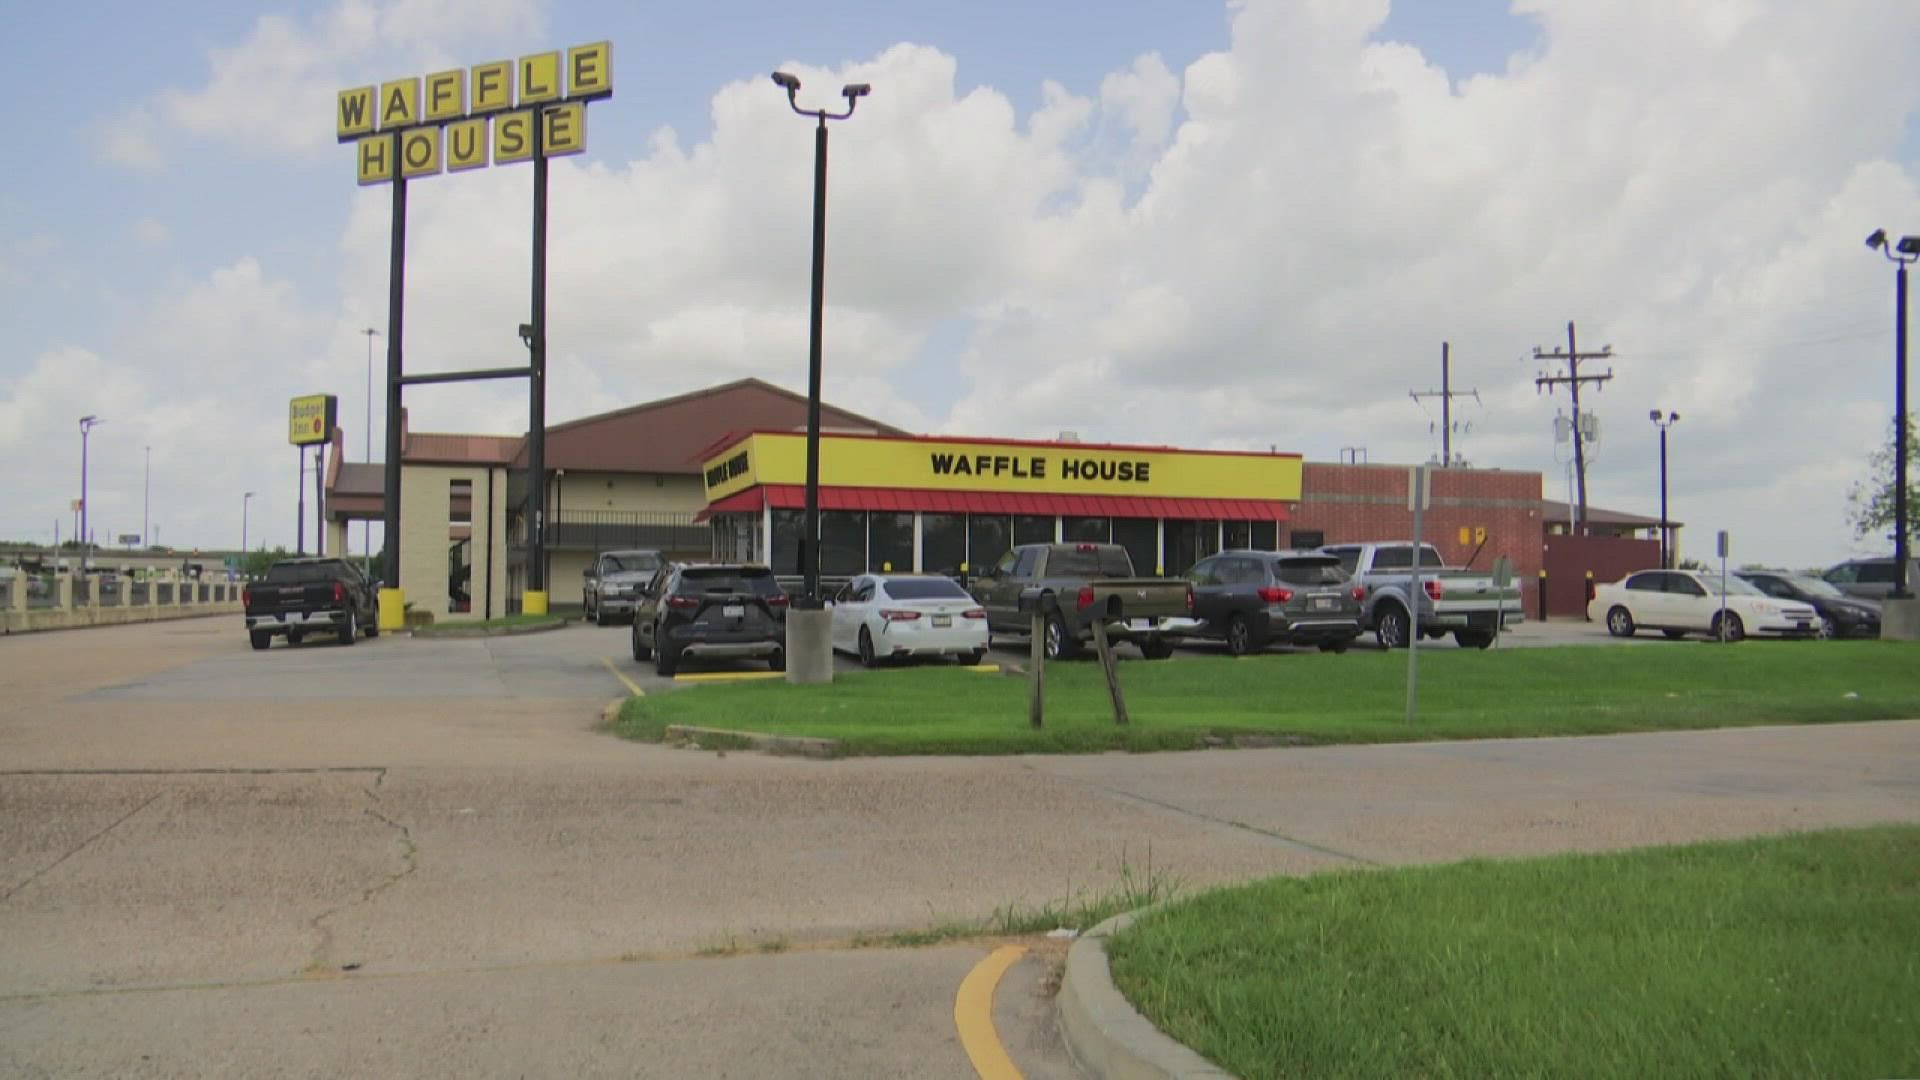 A Metairie teen was killed and two juveniles were injured in a shooting outside of a Waffle House in Gonzales.